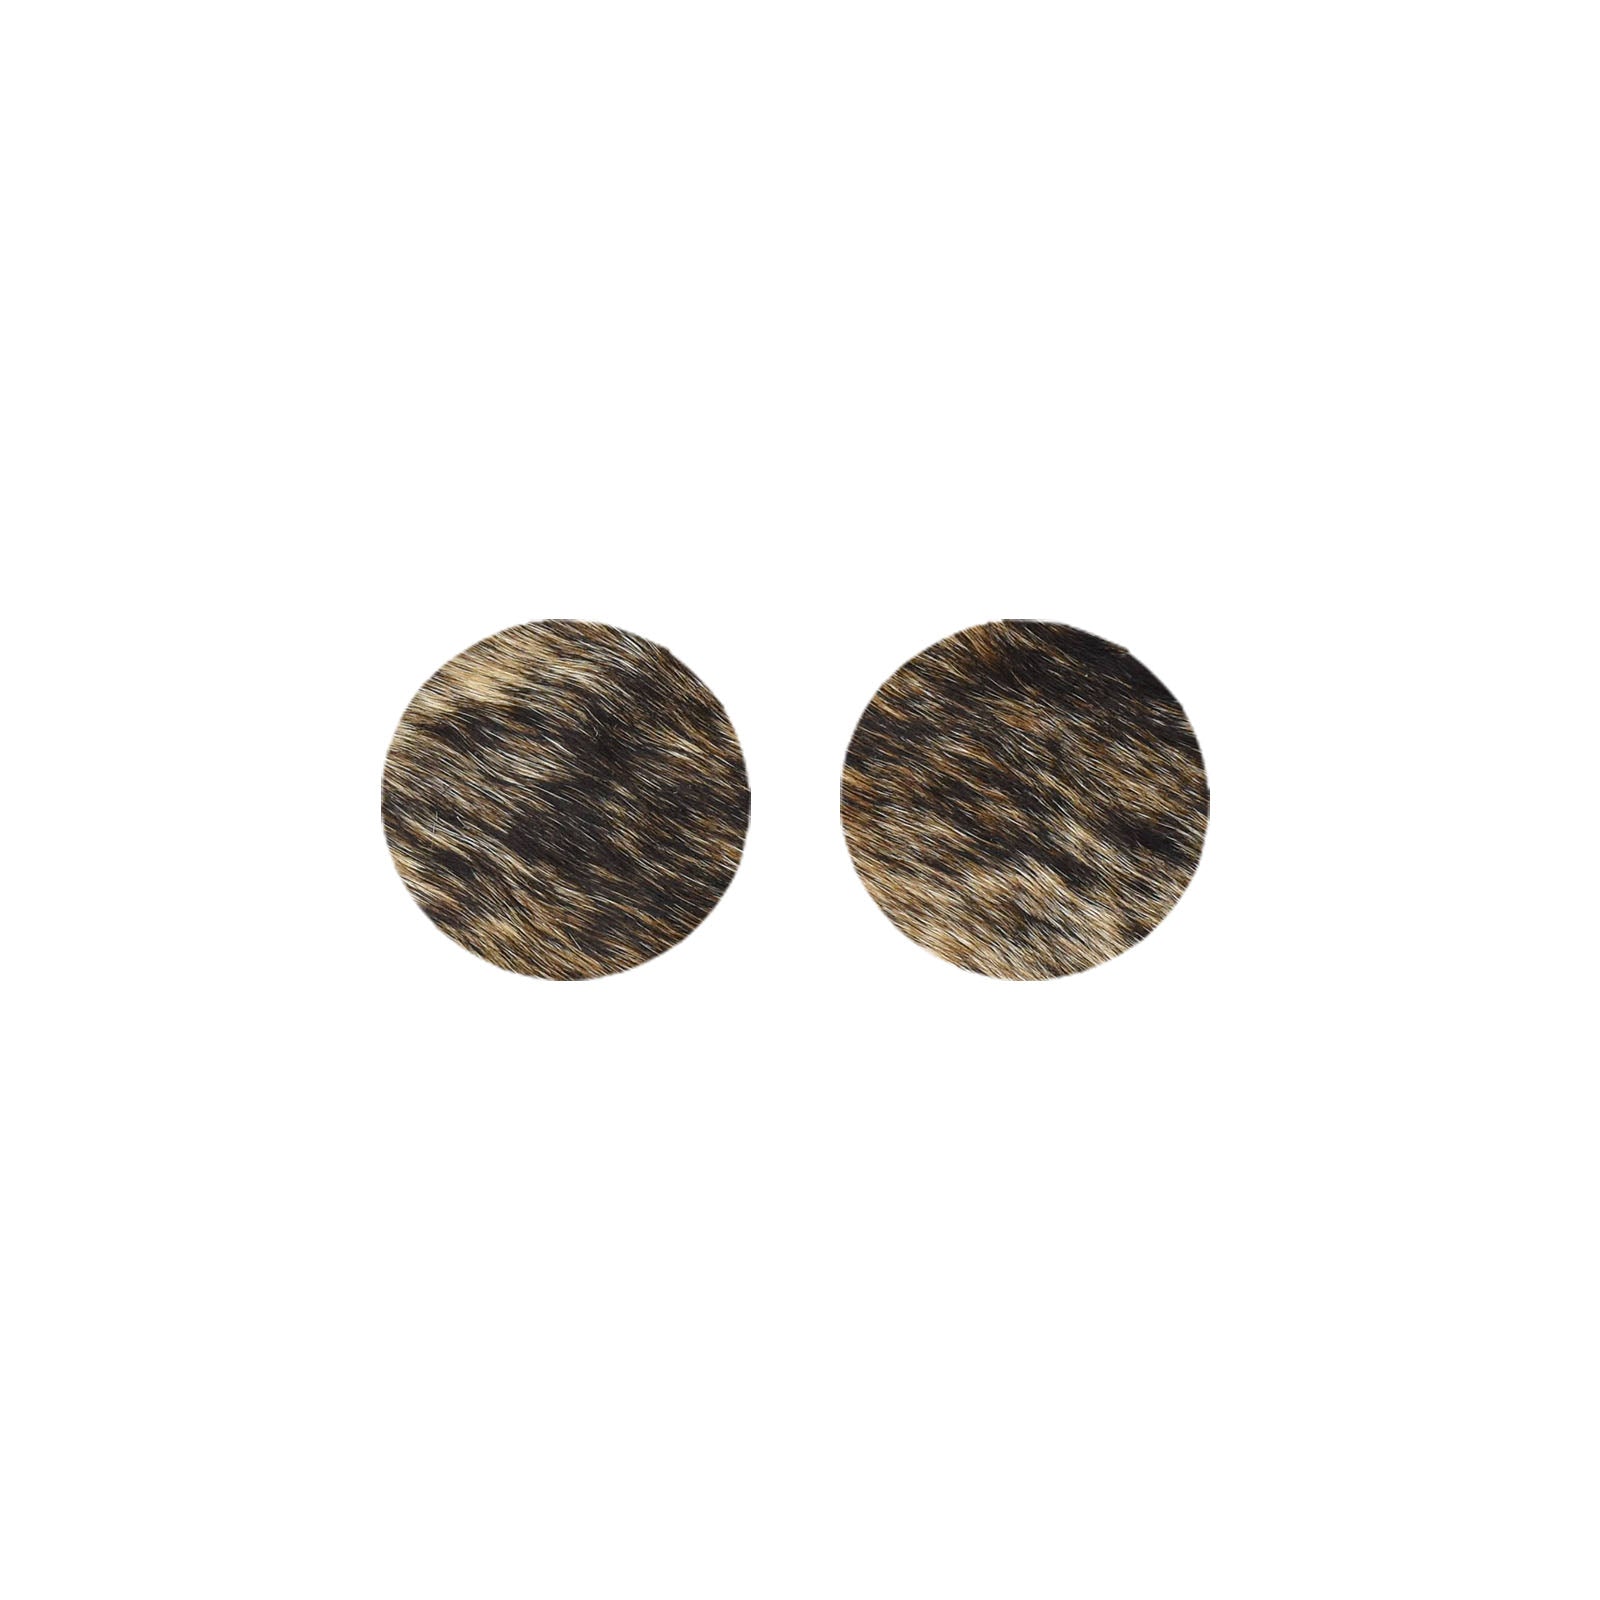 Light Brindle Light to Medium Brown, Black, and Off-White Hair On Die Cut Earrings, Medium Circle | The Leather Guy